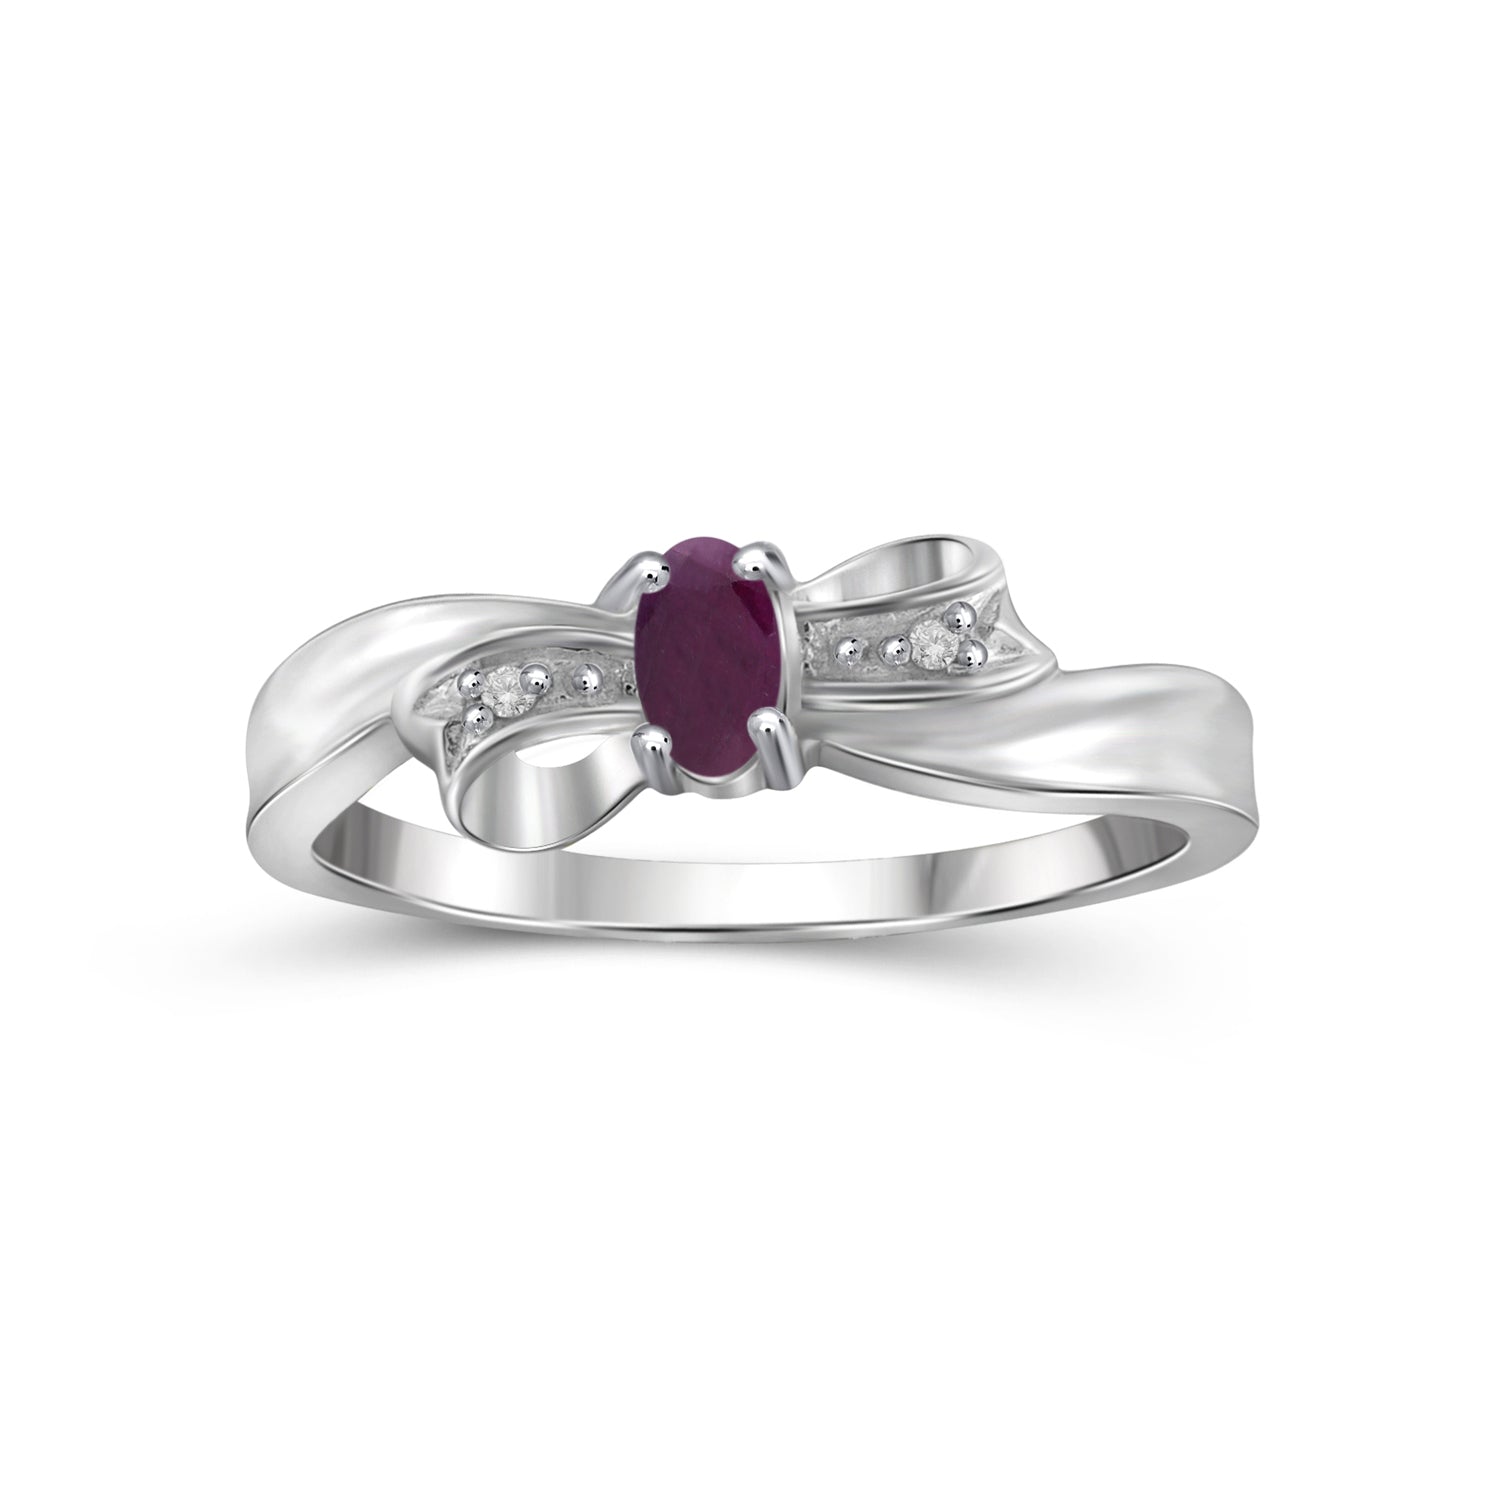 Ruby Ring Birthstone Jewelry – 0.20 Carat Ruby Sterling Silver Ring Jewelry with White Diamond Accent – Gemstone Rings with Hypoallergenic Sterling Silver Band